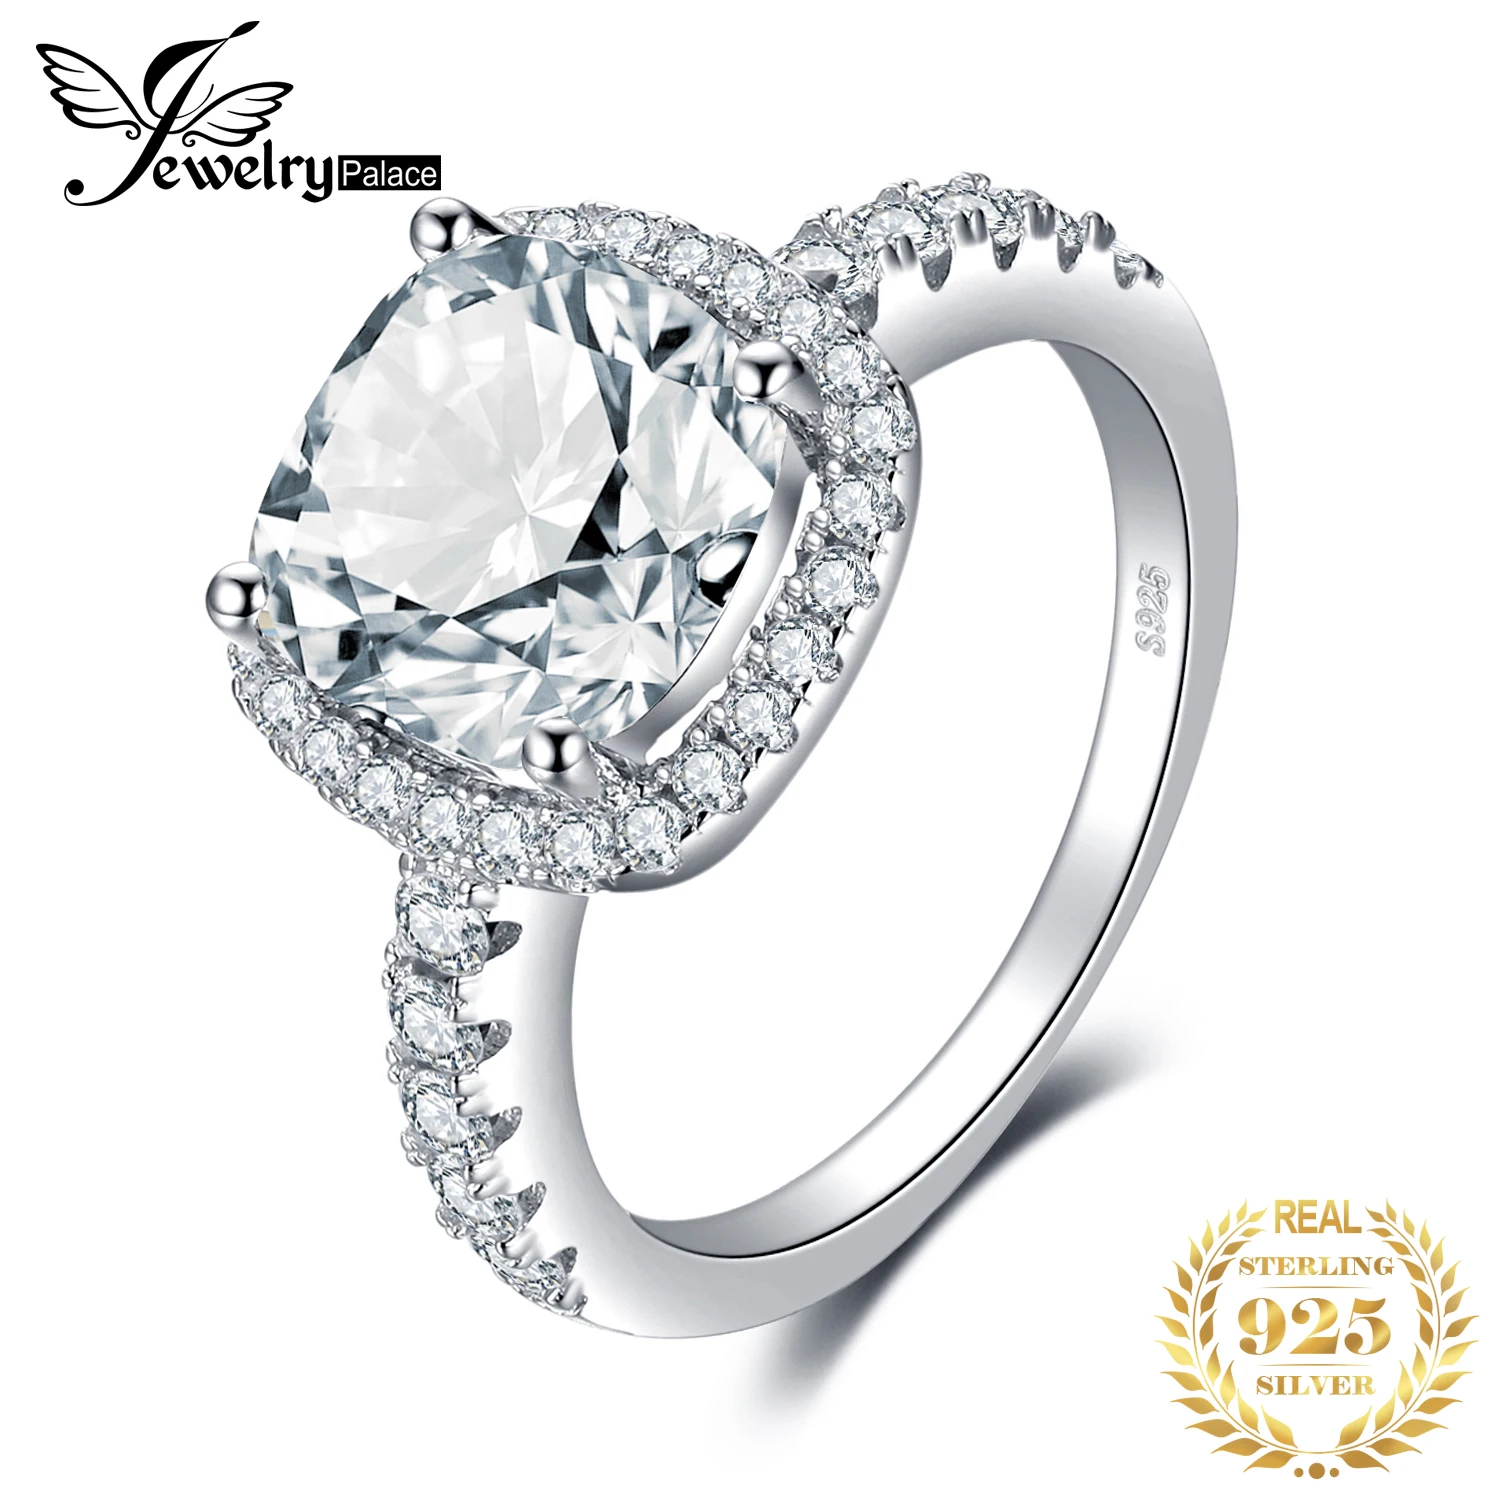 Concept Jewelry 2Ct Round Cut Cubic Zirconia Halo Solitaire Engagement Ring in 925 Sterling Silver with 14k White Gold Finish